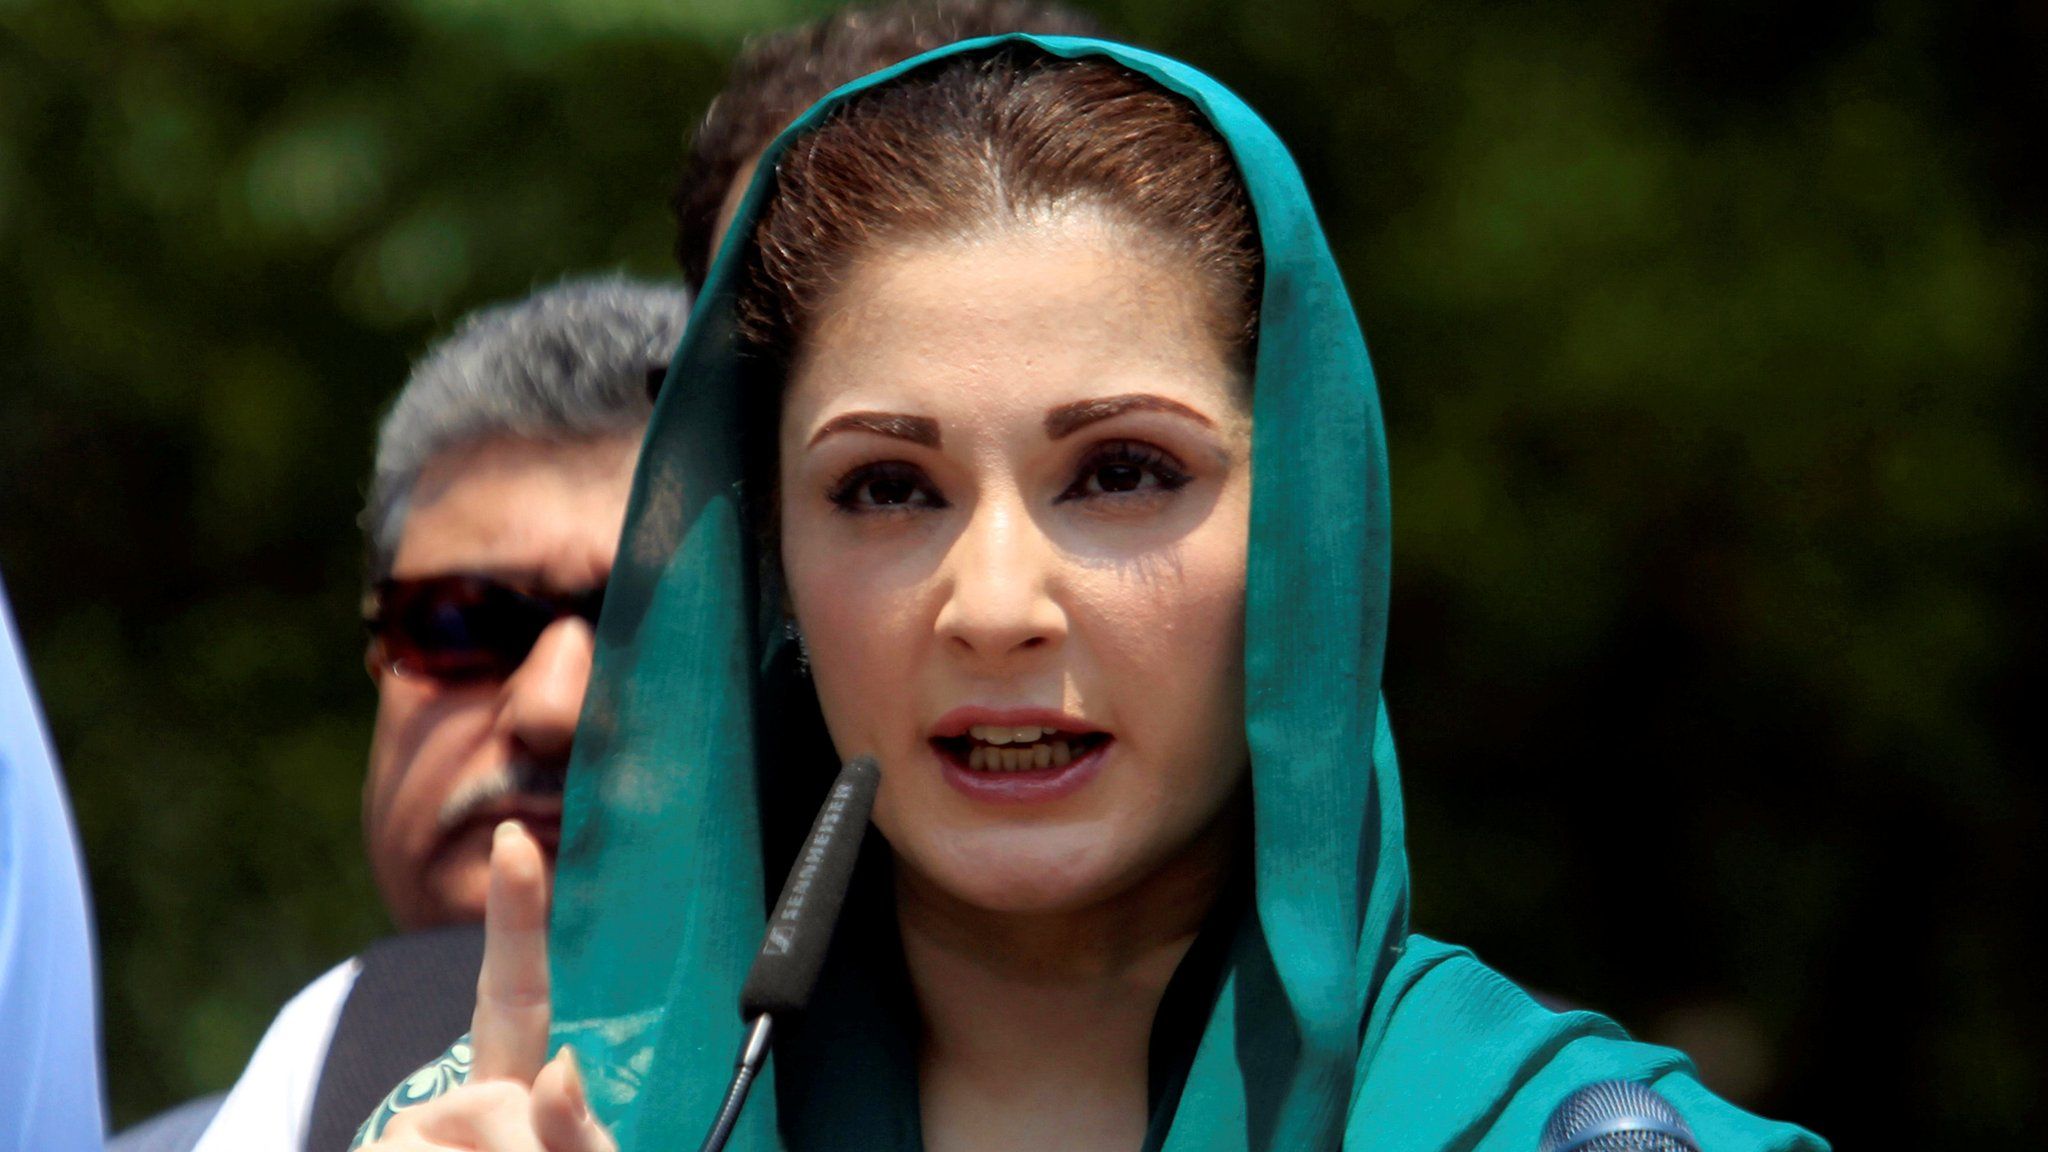 Maryam Nawaz gestures as she speaks to media after appearing before a Joint Investigation Team (JIT) in Islamabad, Pakistan, on 5 July 2017